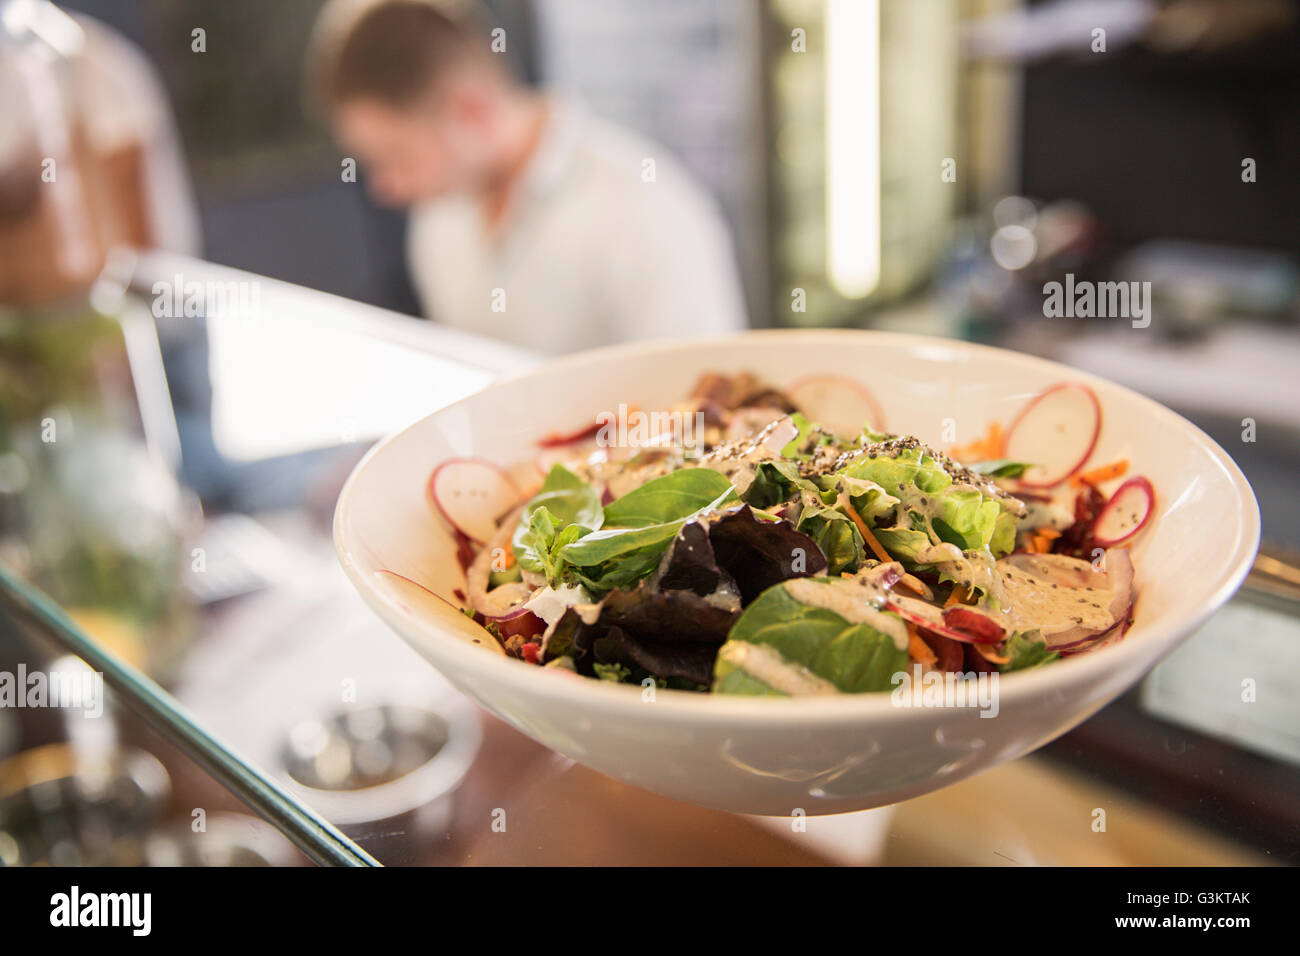 Bowl of salad on glass counter in restaurant Stock Photo